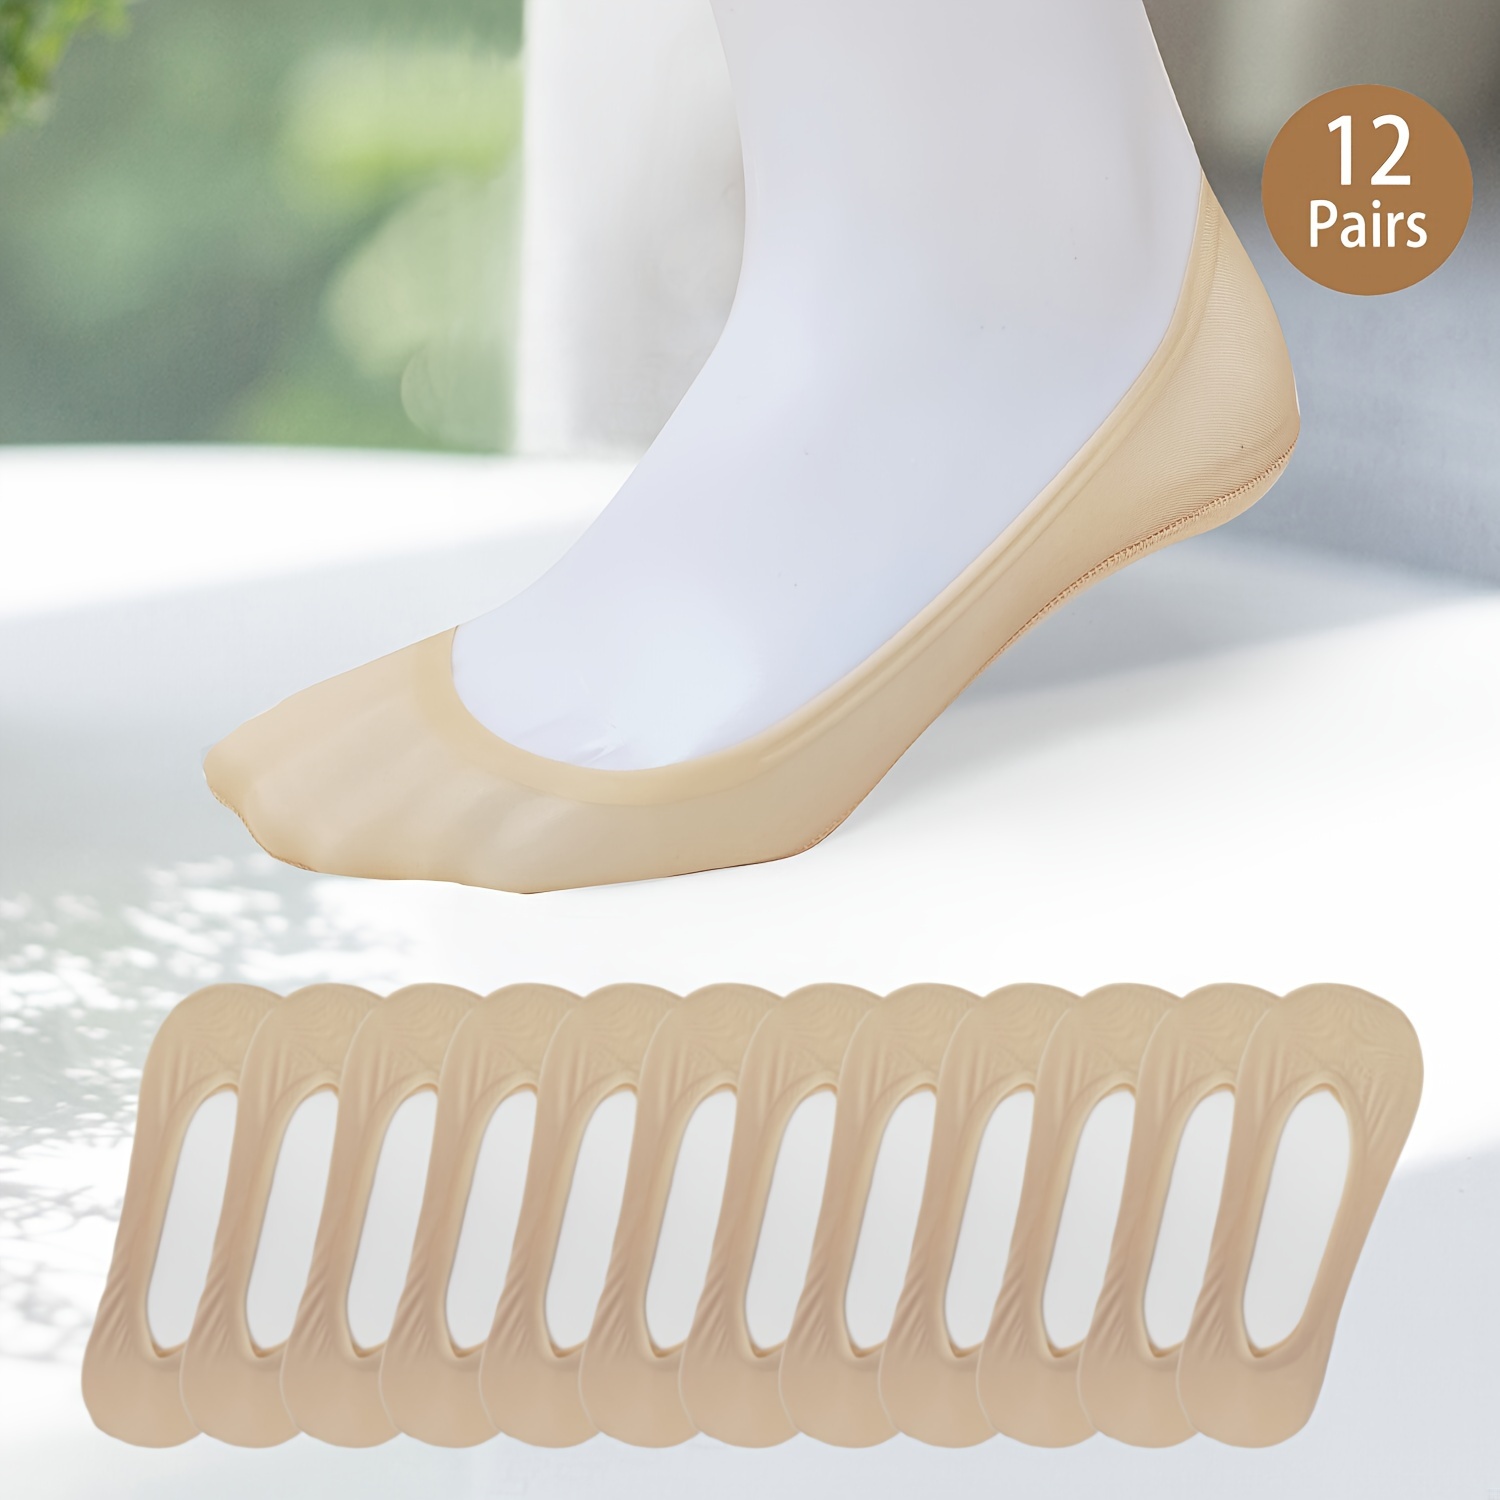 

12 Pairs Solid No Show Socks, Breathable & Comfort Invisible Socks, Women's Stockings & Hosiery